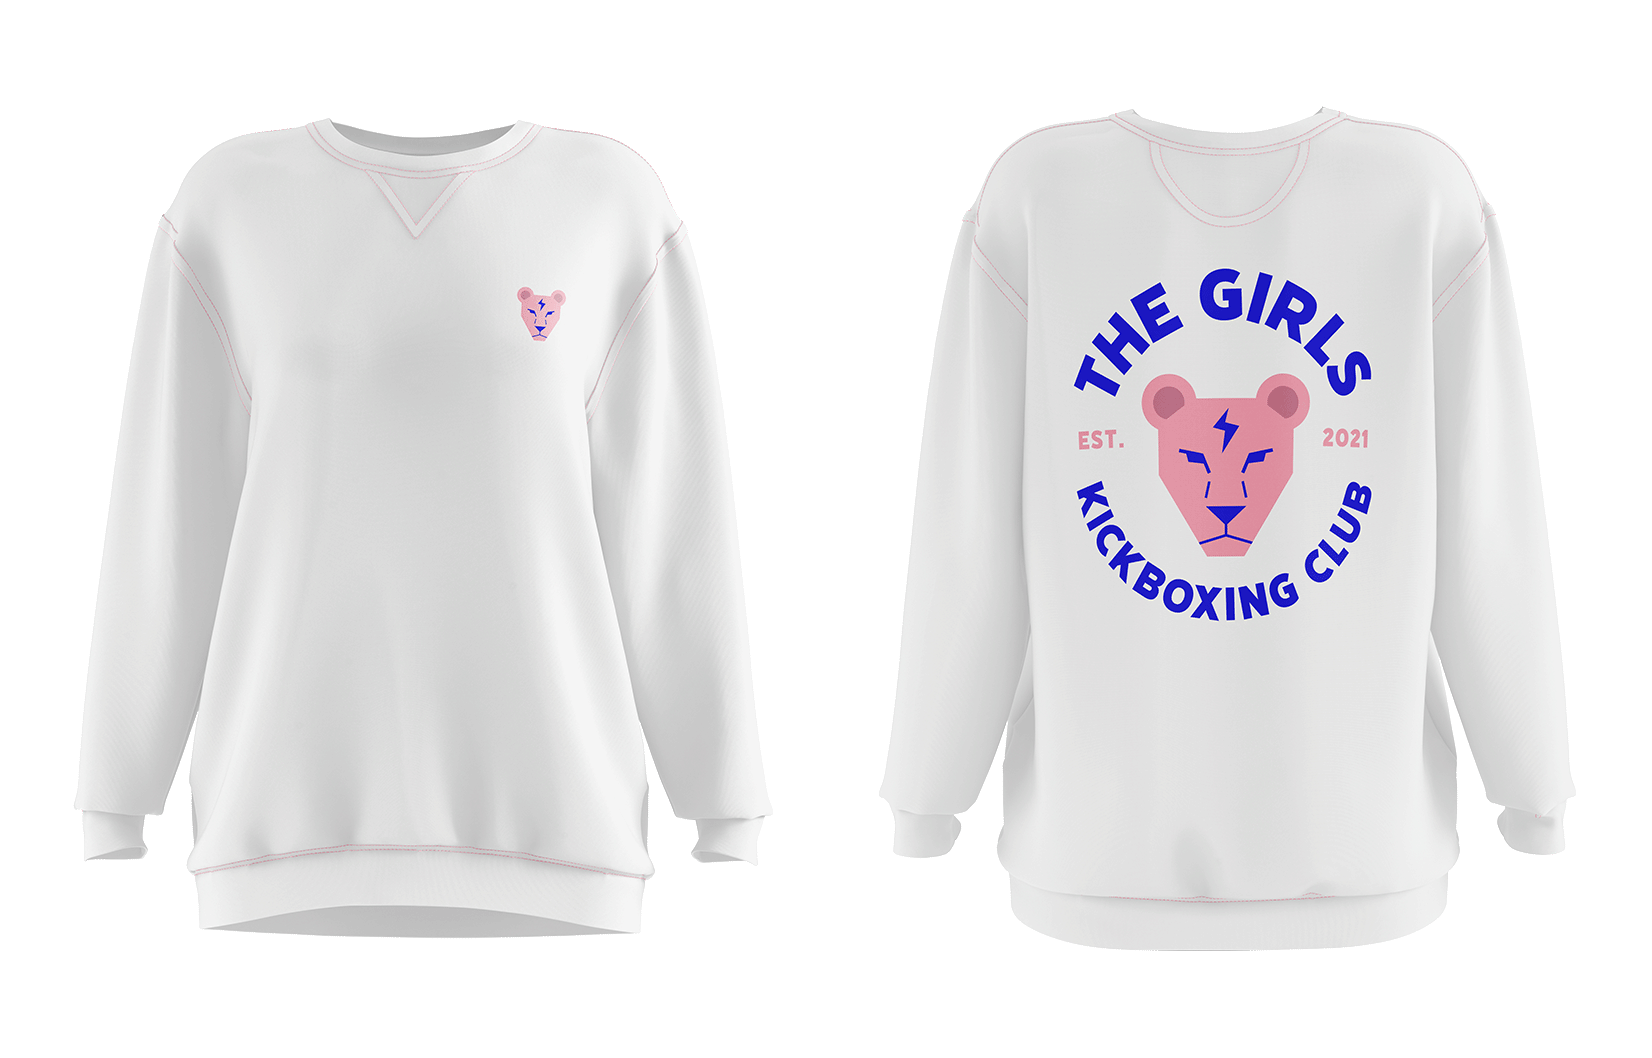 Front and back of a white hoodie with branding from The Girls Kickboxing Club.